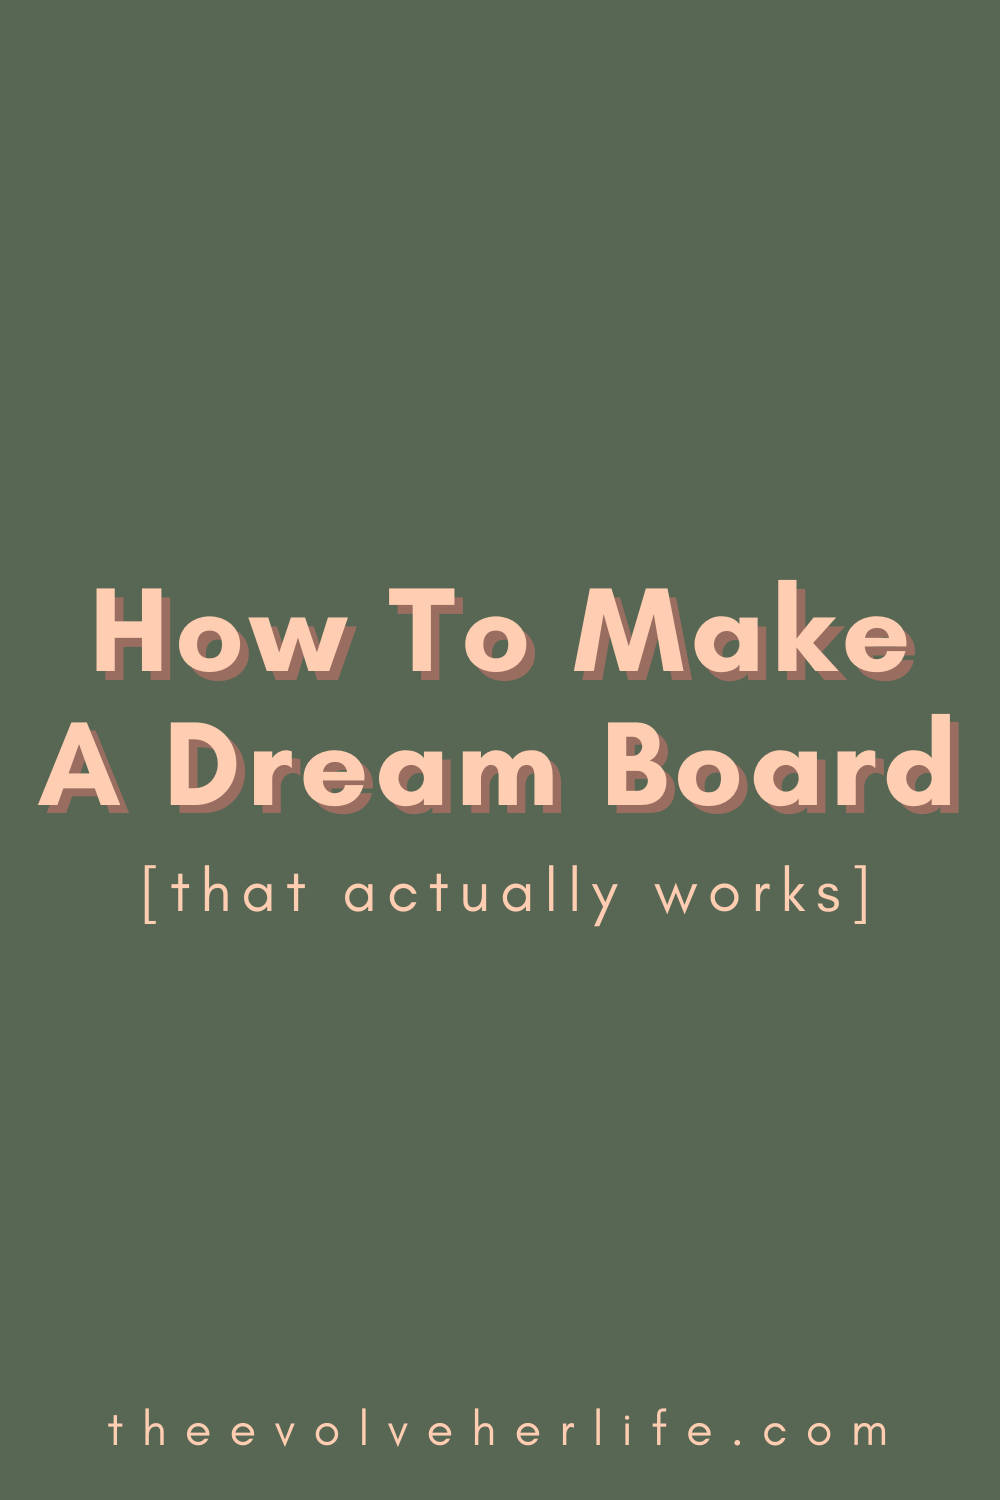 7 Inspirational Vision Board Ideas That Actually Work In 21 Evolve Her Life